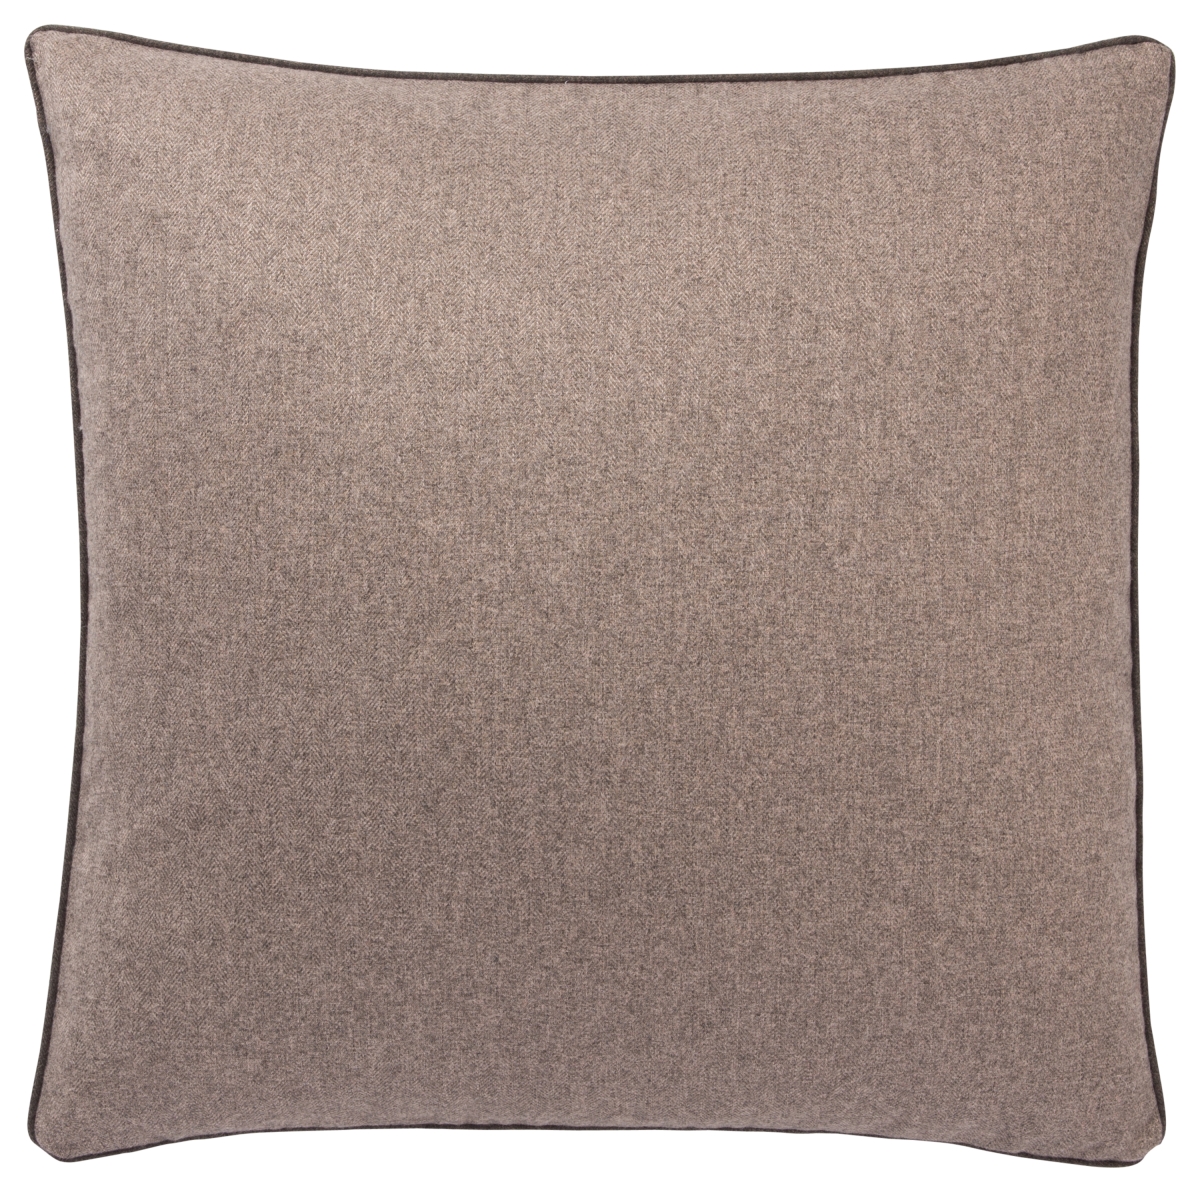 Plw103287 22 X 22 In. Pilcro Rollins Solid Light Brown Poly Throw Pillow